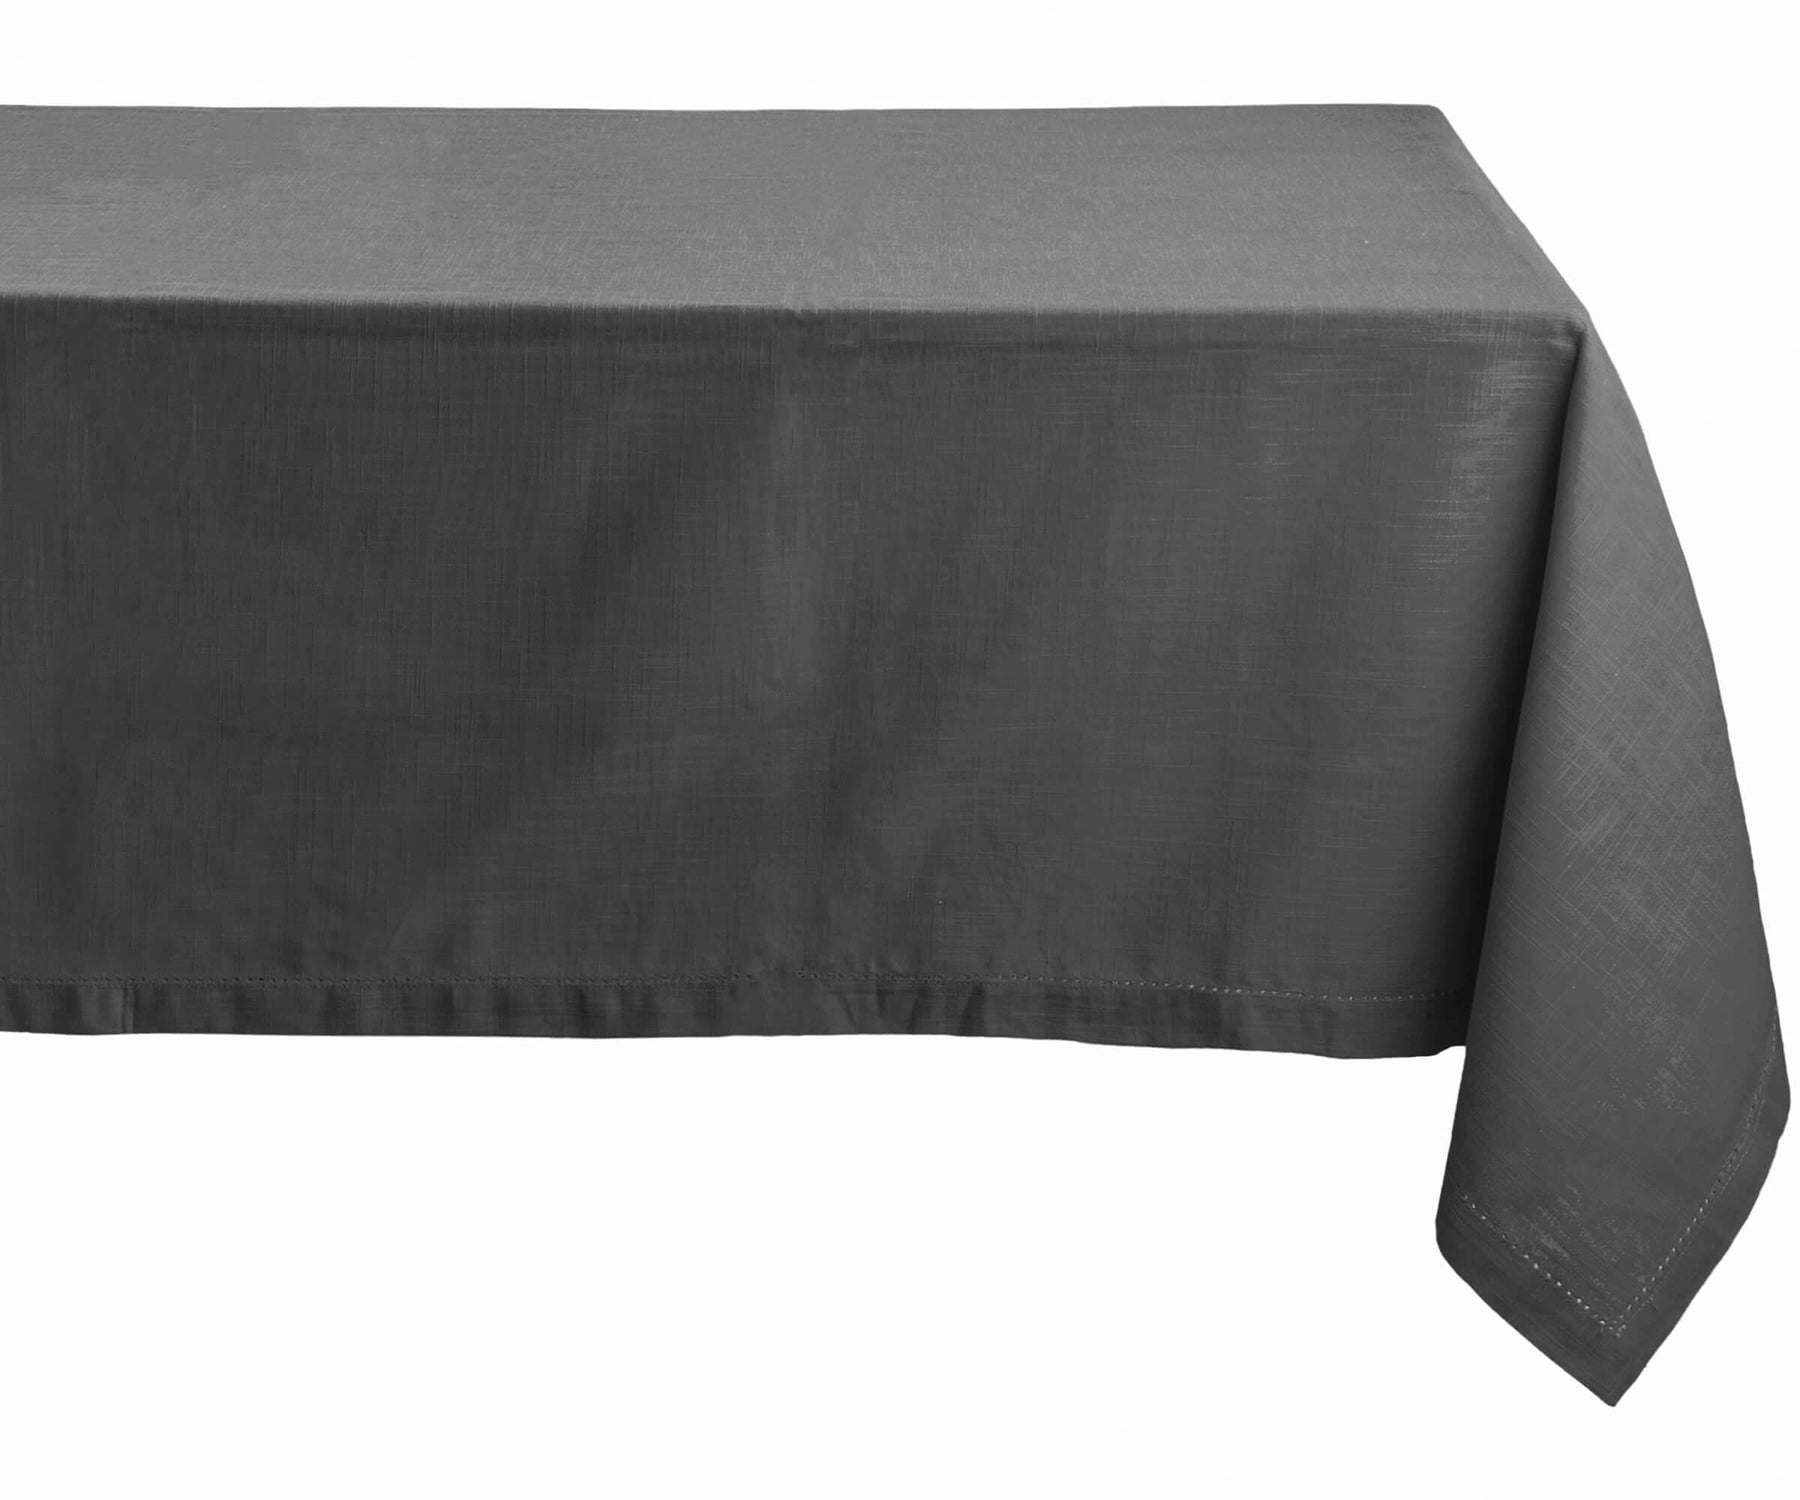 "Set a stylish tone with gray, embrace spring's vibrance, and celebrate holidays with our diverse tablecloth range."